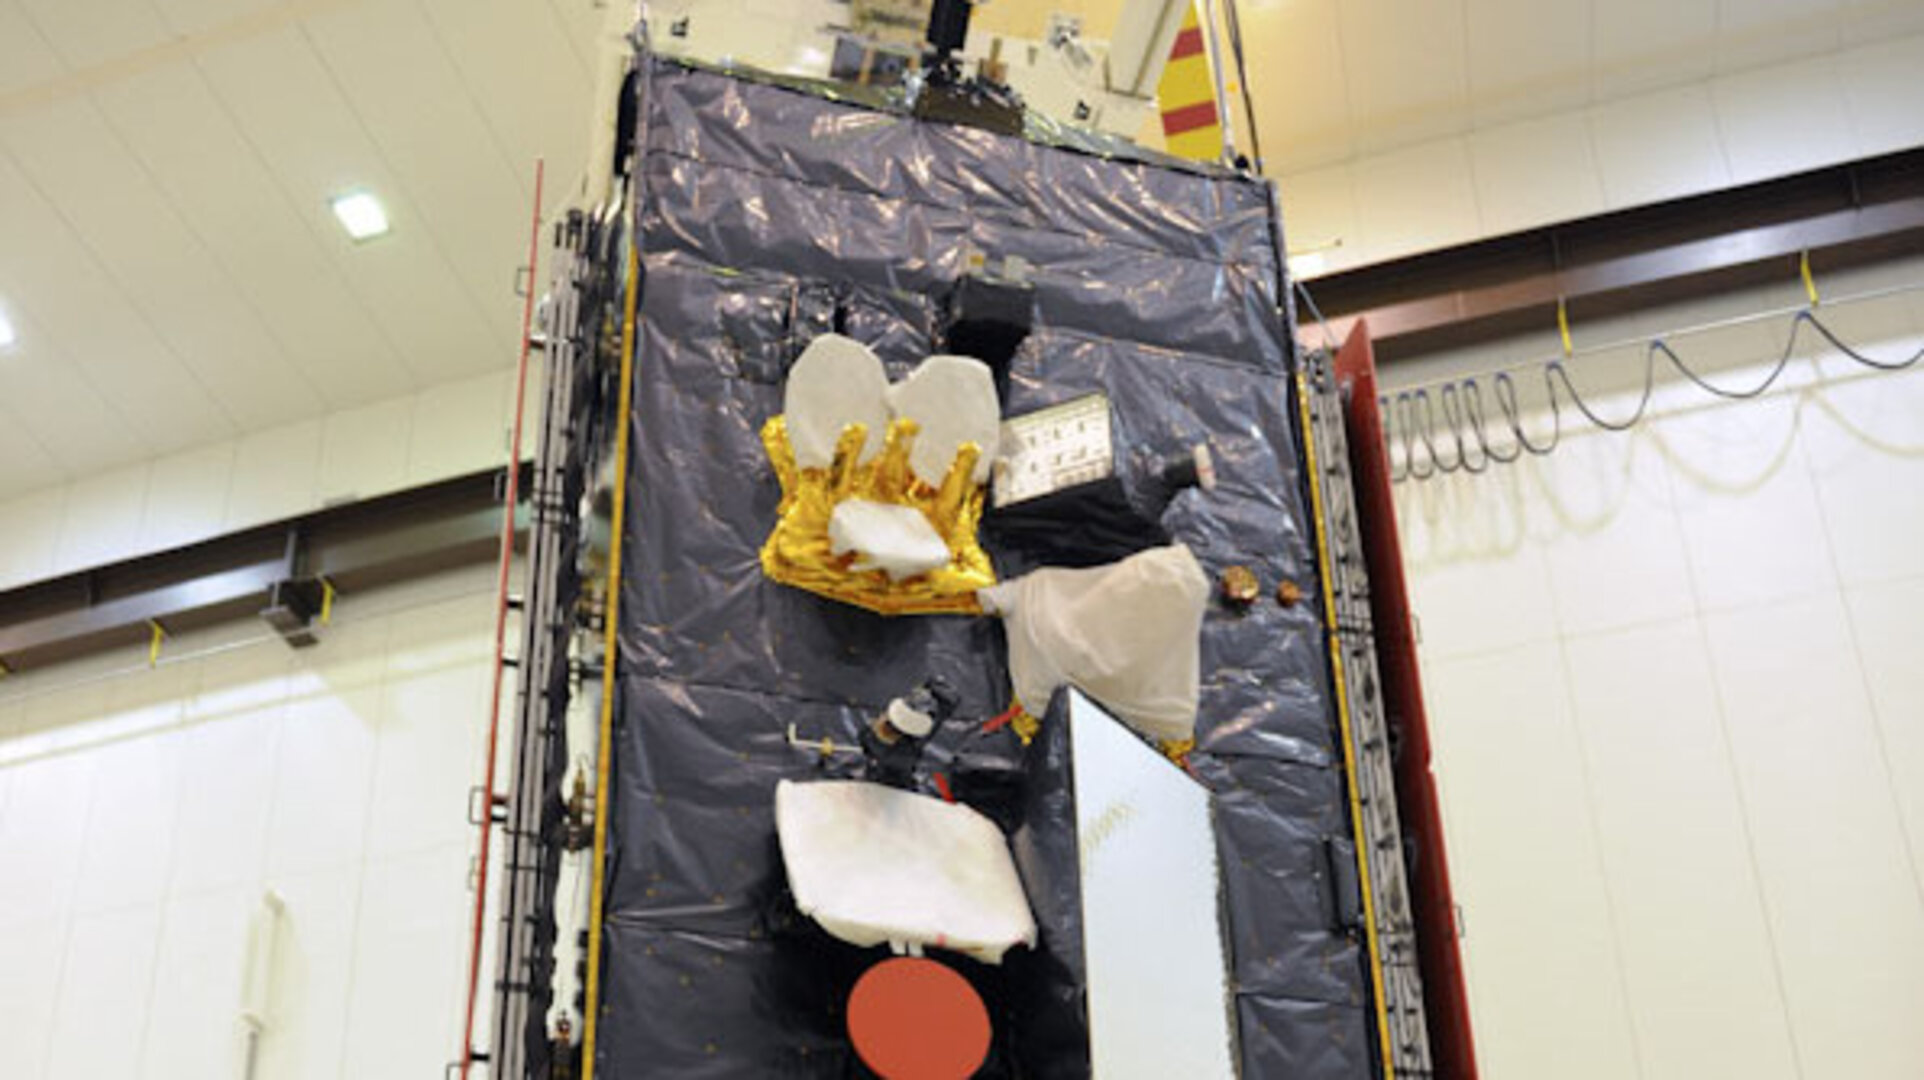 Alphasat in Kourou. The Aldo Paraboni Q/V band payload can be seen on top left.